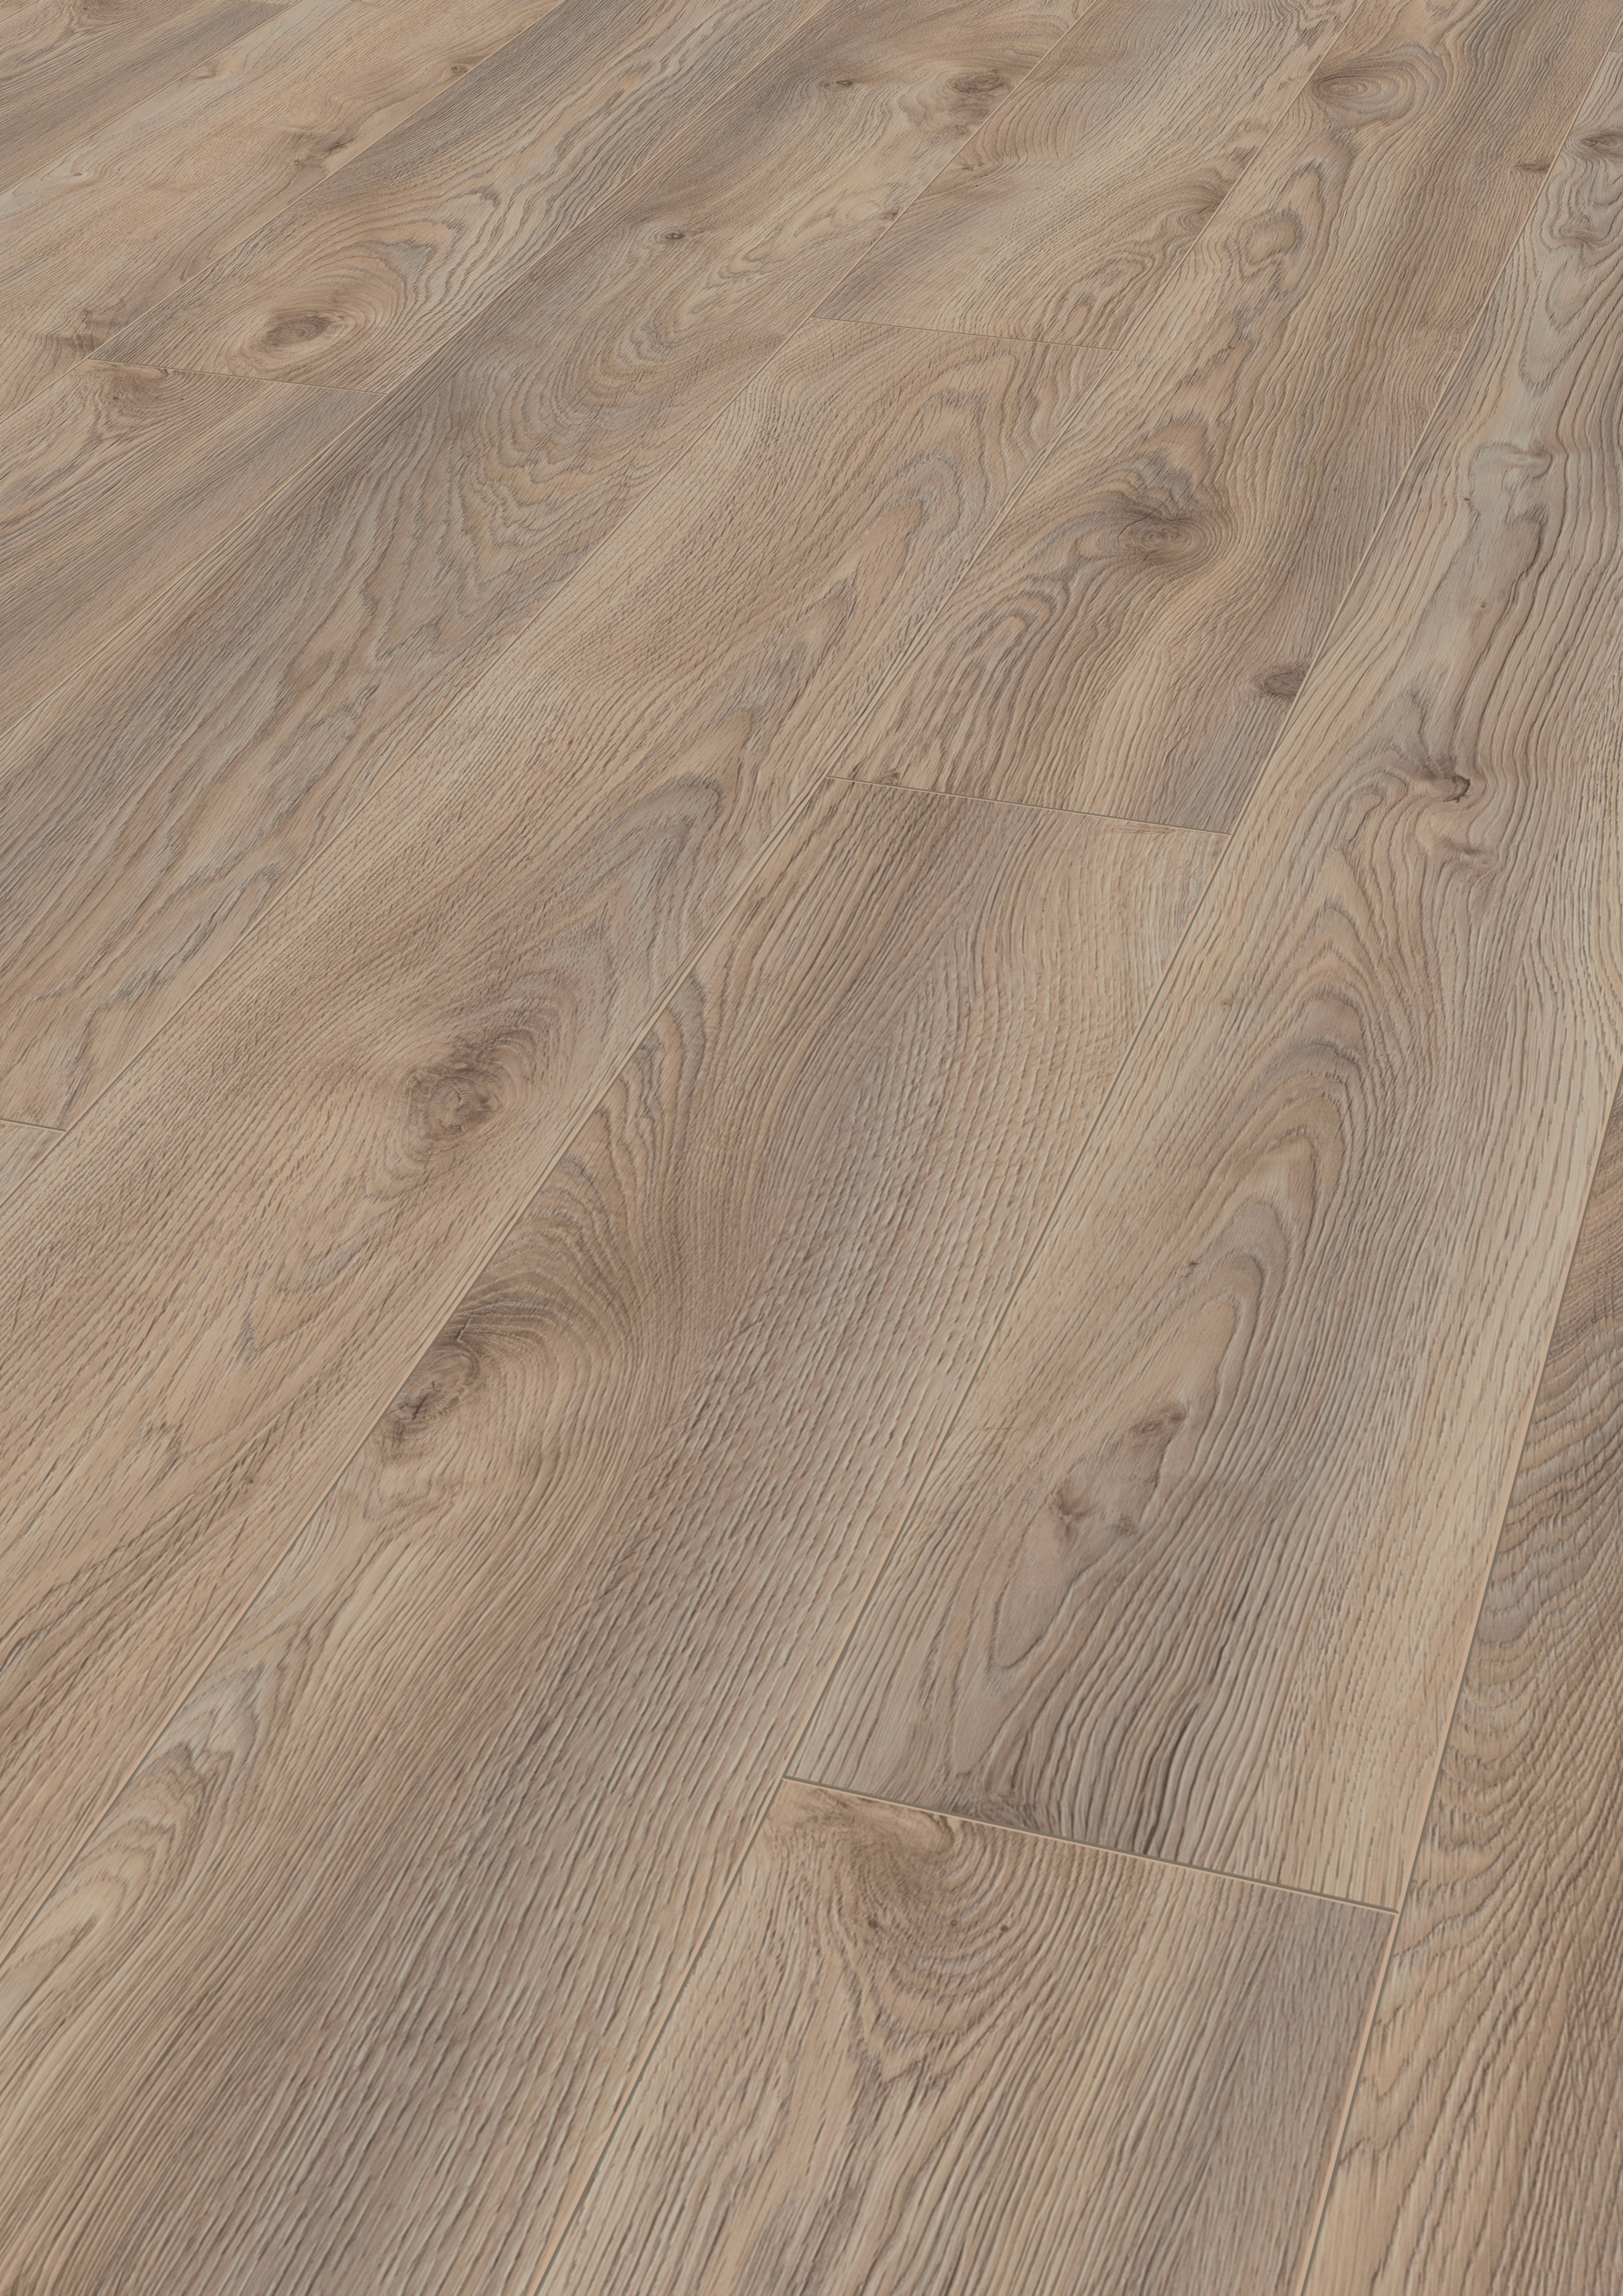 24 Wonderful Hardwood Flooring Sale In Mississauga 2023 free download hardwood flooring sale in mississauga of mammut laminate flooring in country house plank style kronotex with regard to download picture amp